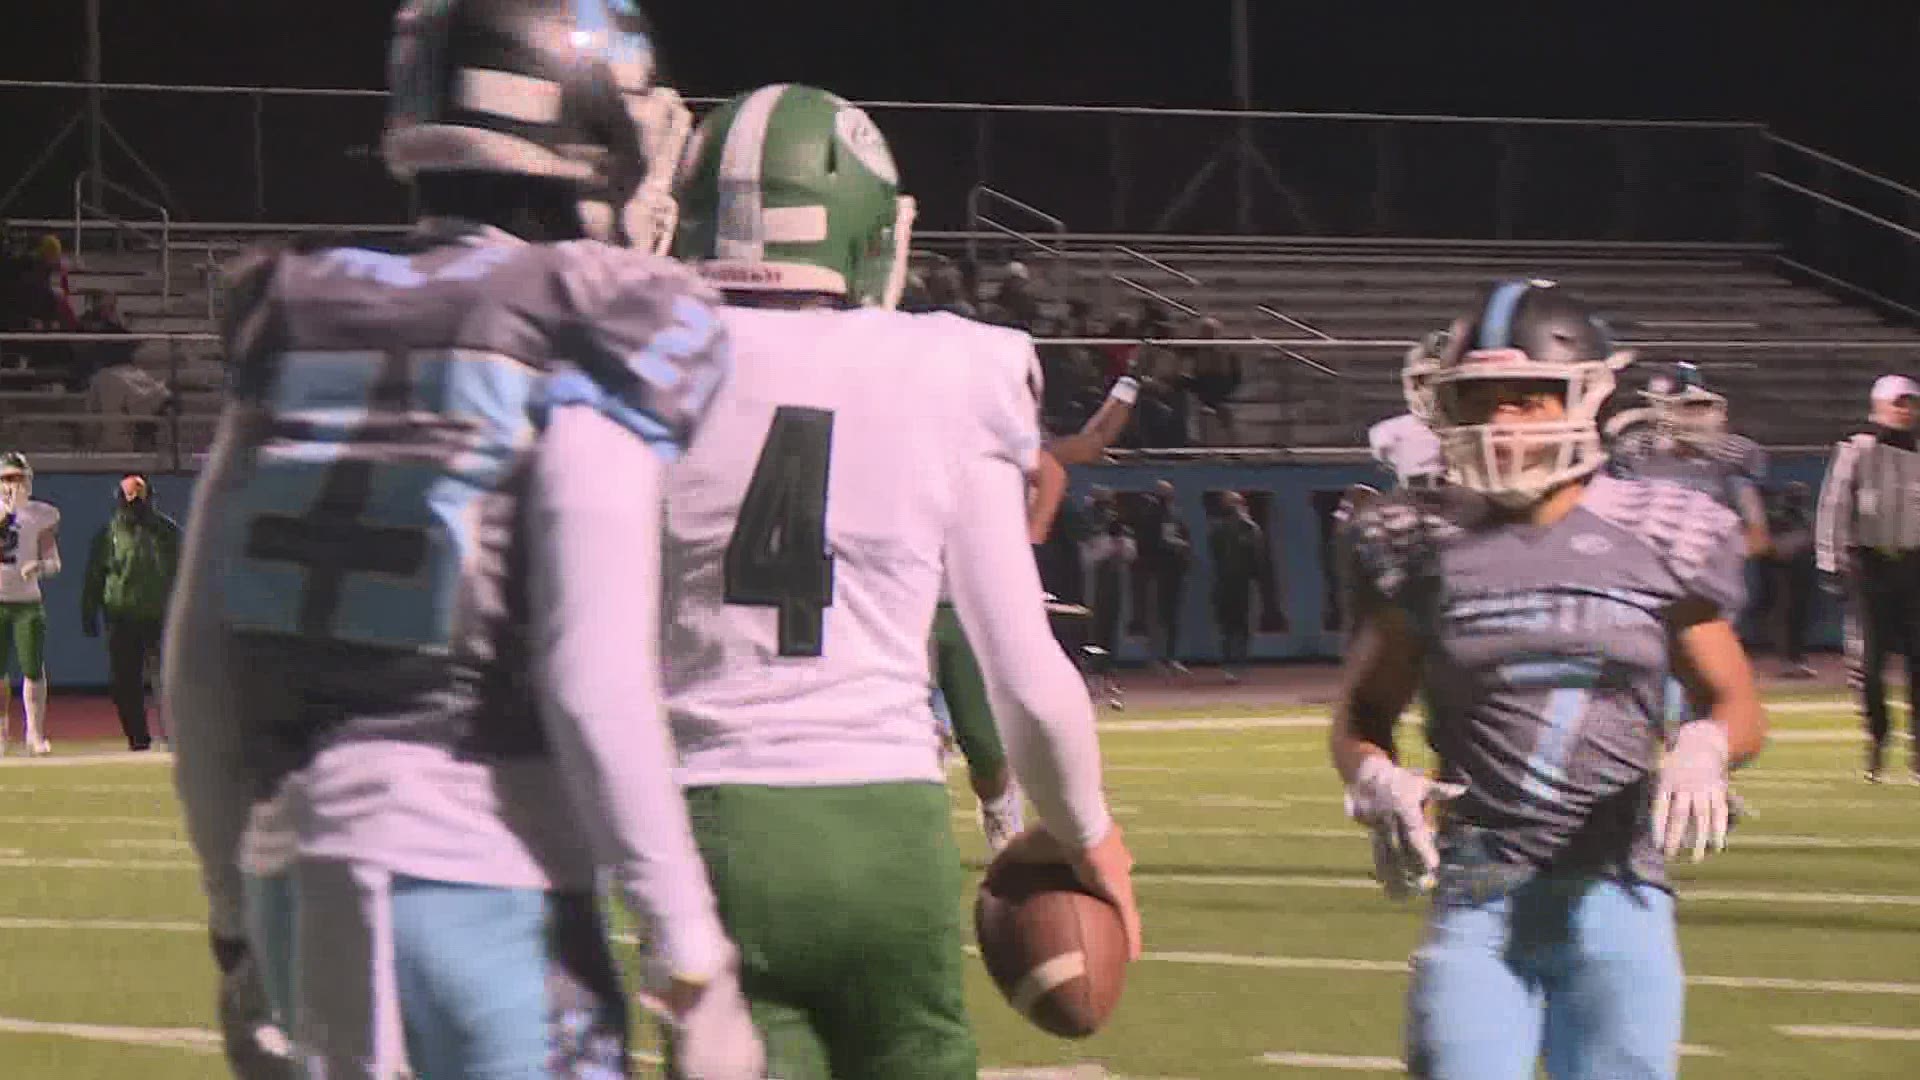 Highlights from Division 4 playoff action between Wayland and Grand Rapids Christian